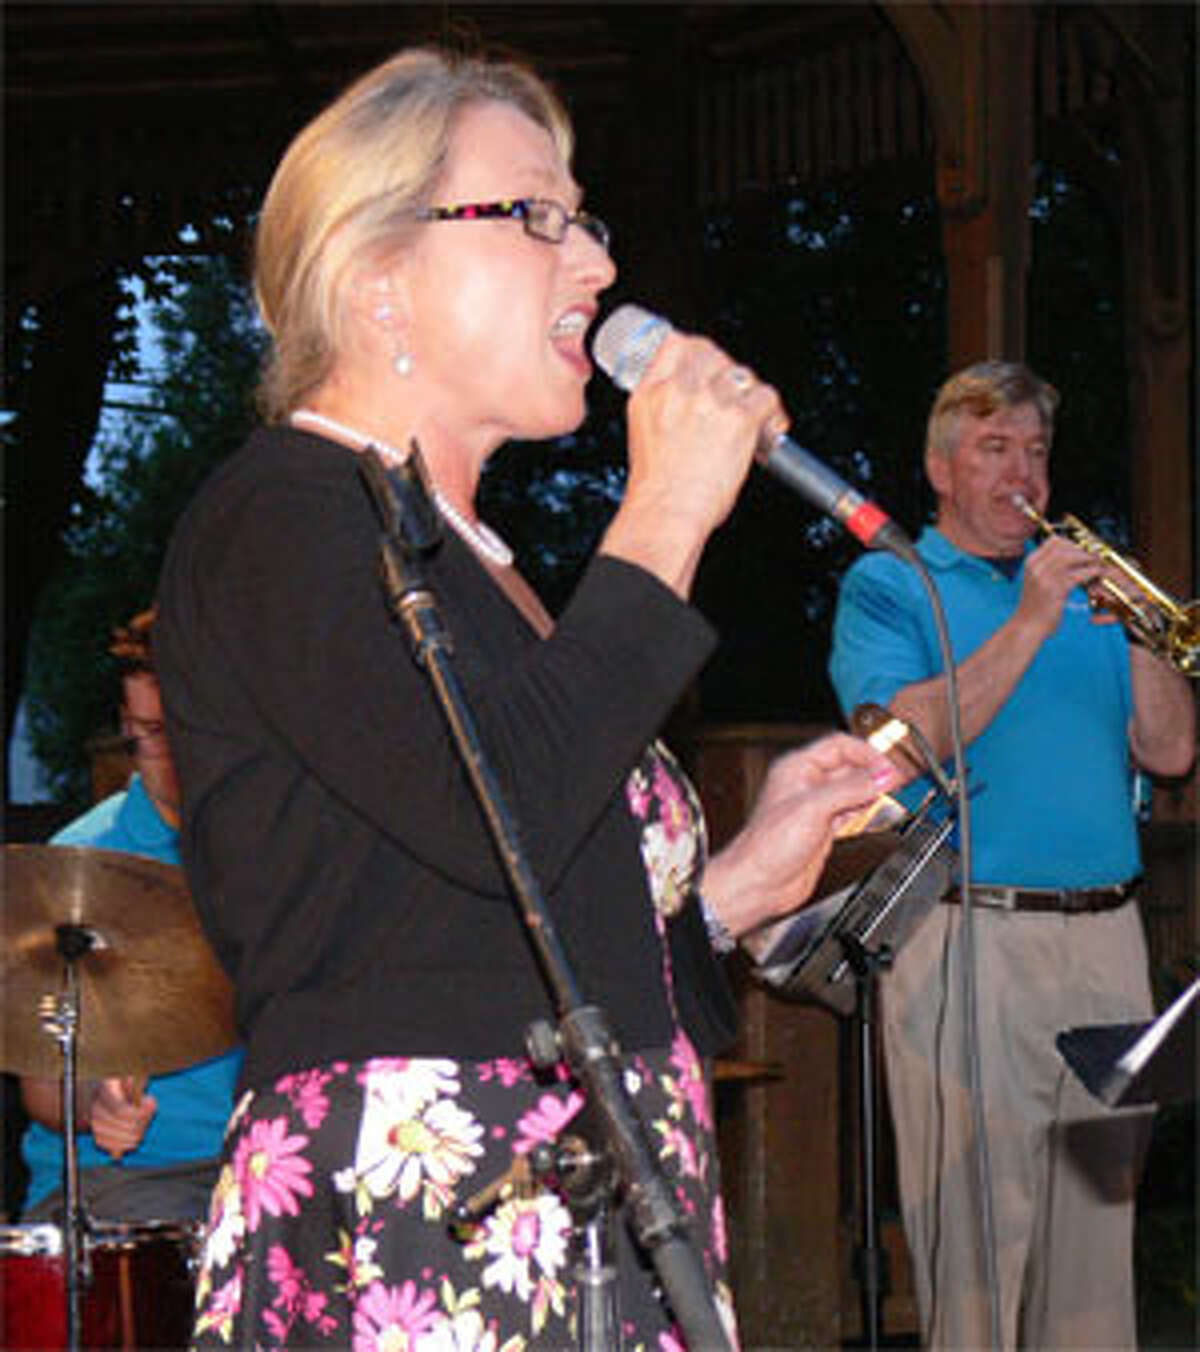 Vocalist Corinne Thurstan sings with the Little Big Band during the concert.